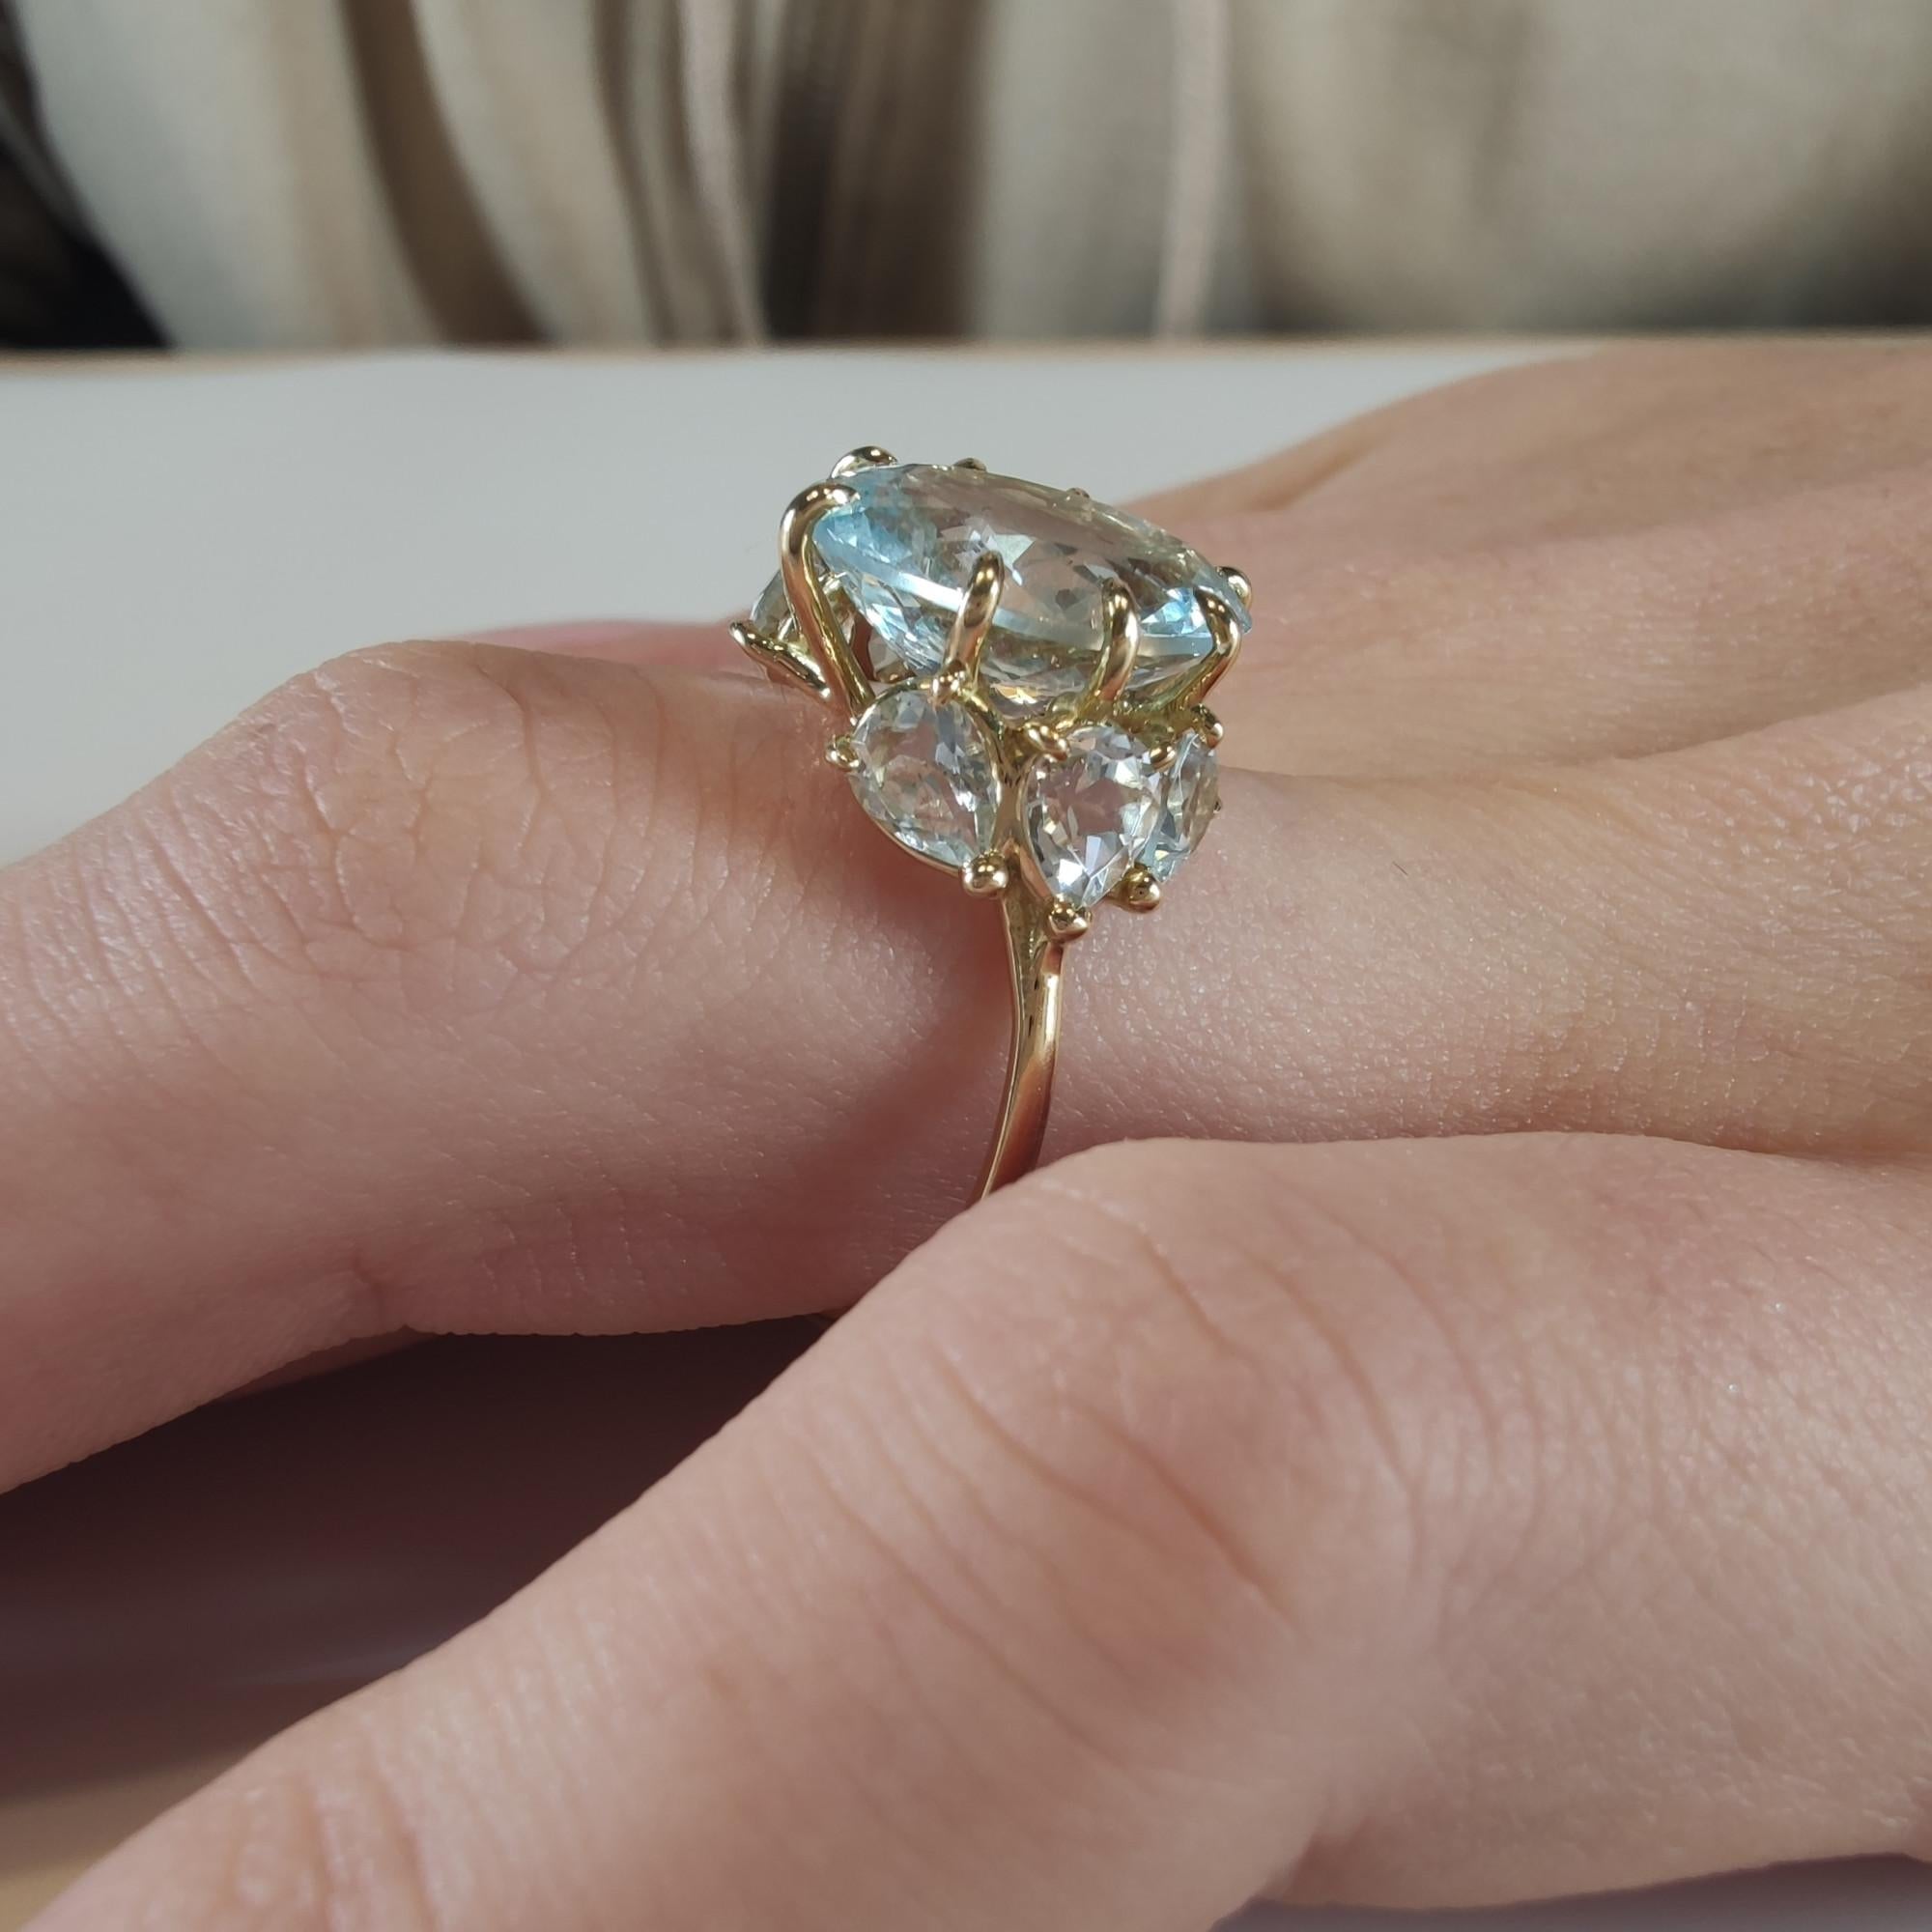 Contemporary Handmade 4.8 Carat Oval Aquamarine Cocktail Ring in 18K Yellow Gold For Sale